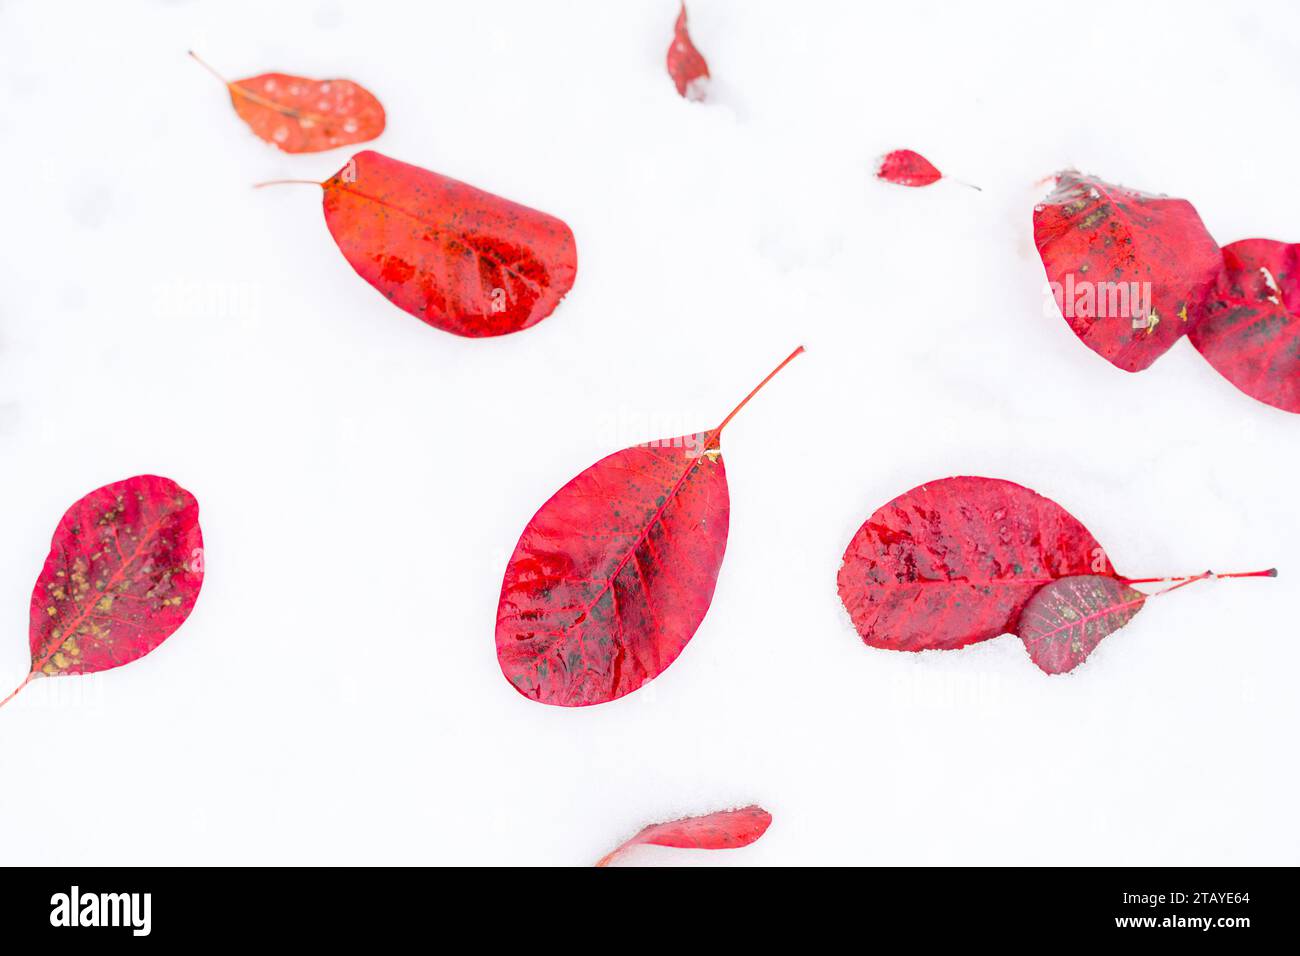 Red leaves from a shrub lay on a snow covered ground. Stock Photo